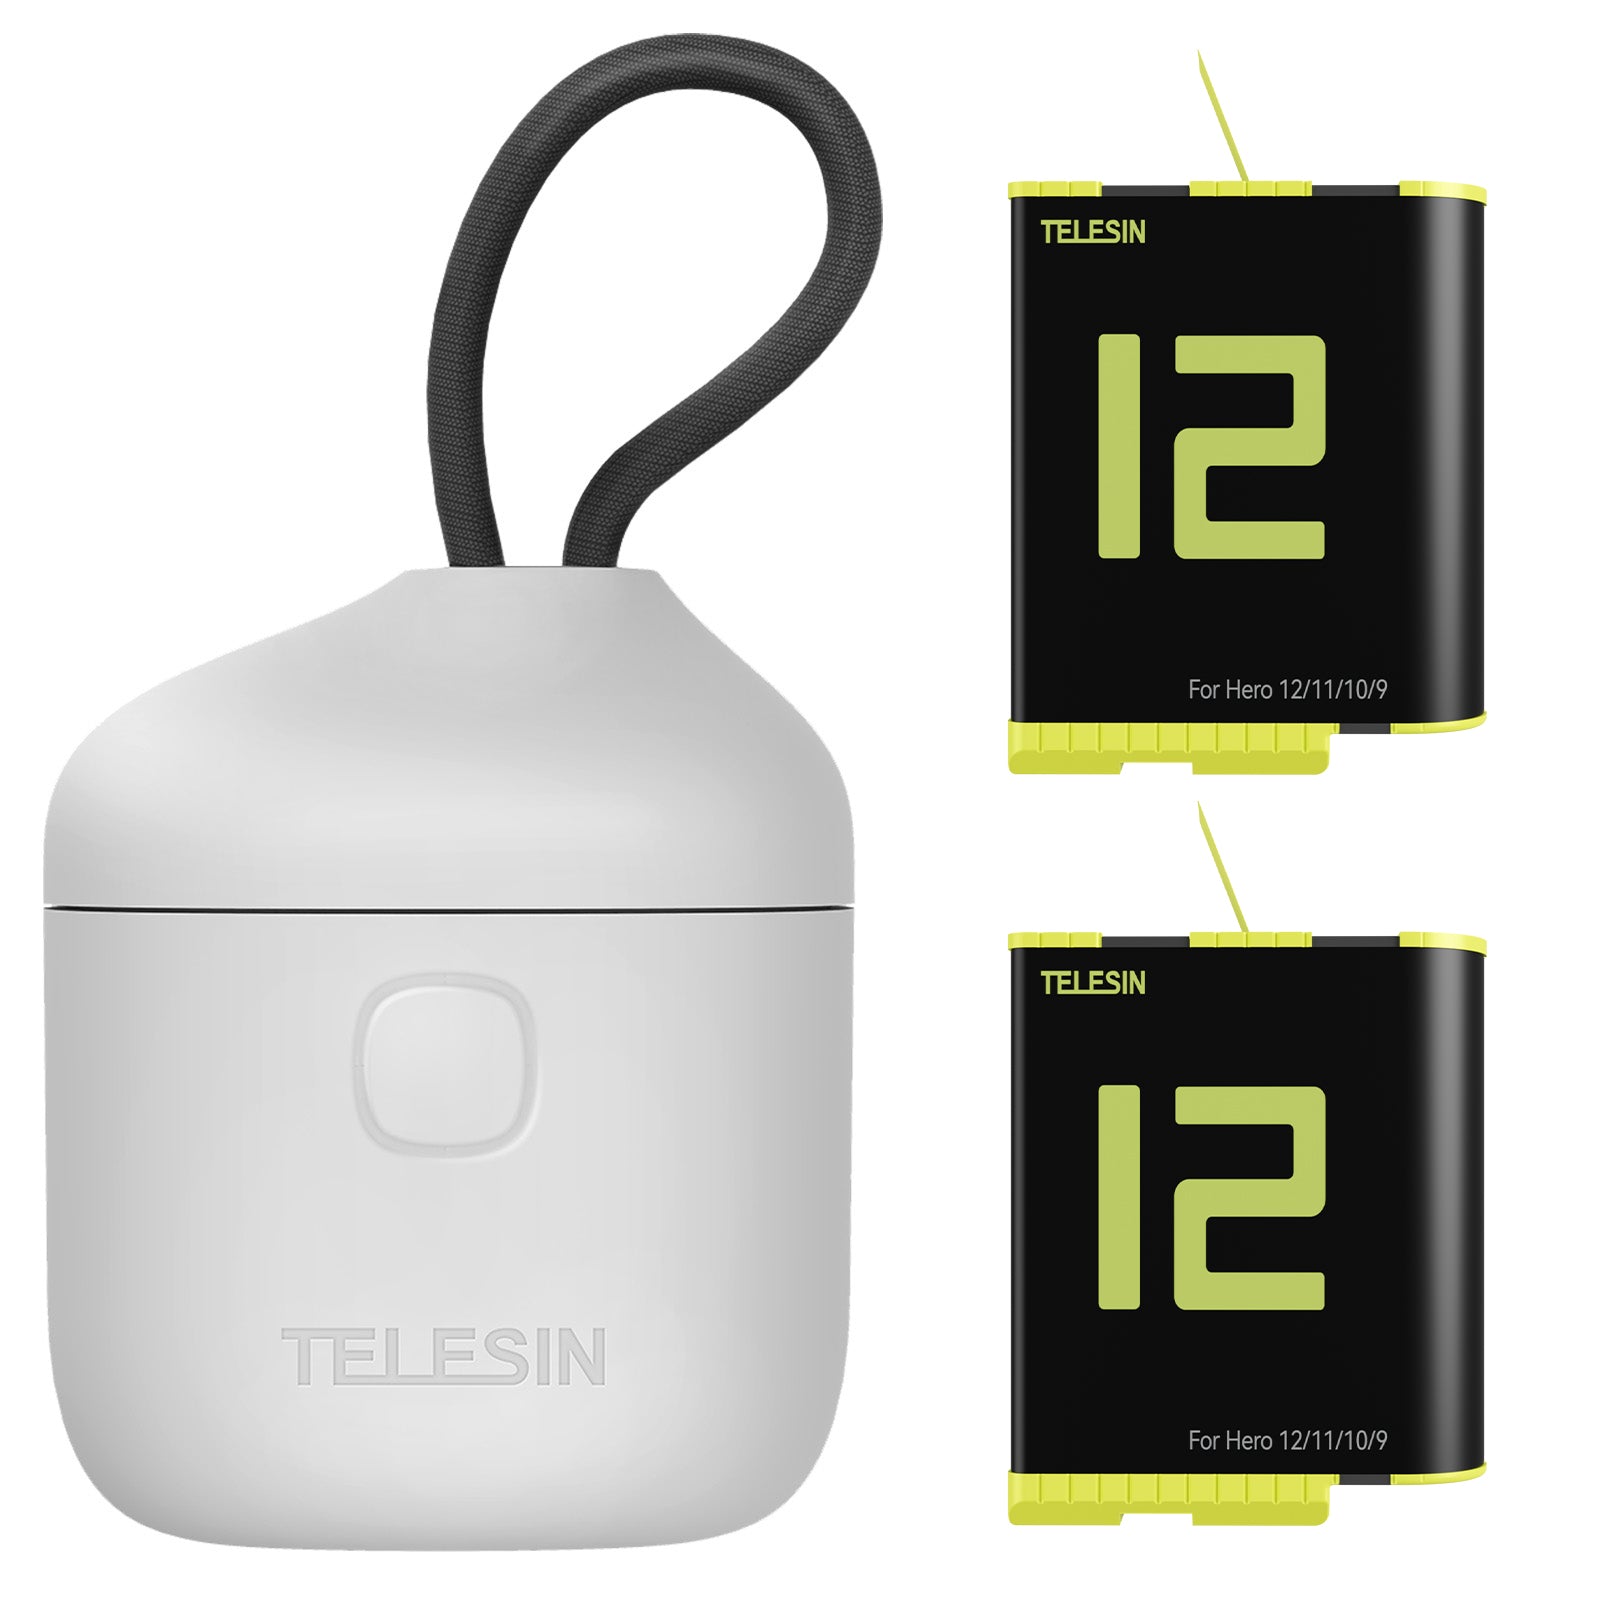 TELESIN Charger with Batteries for GoPro 12/11/10/9